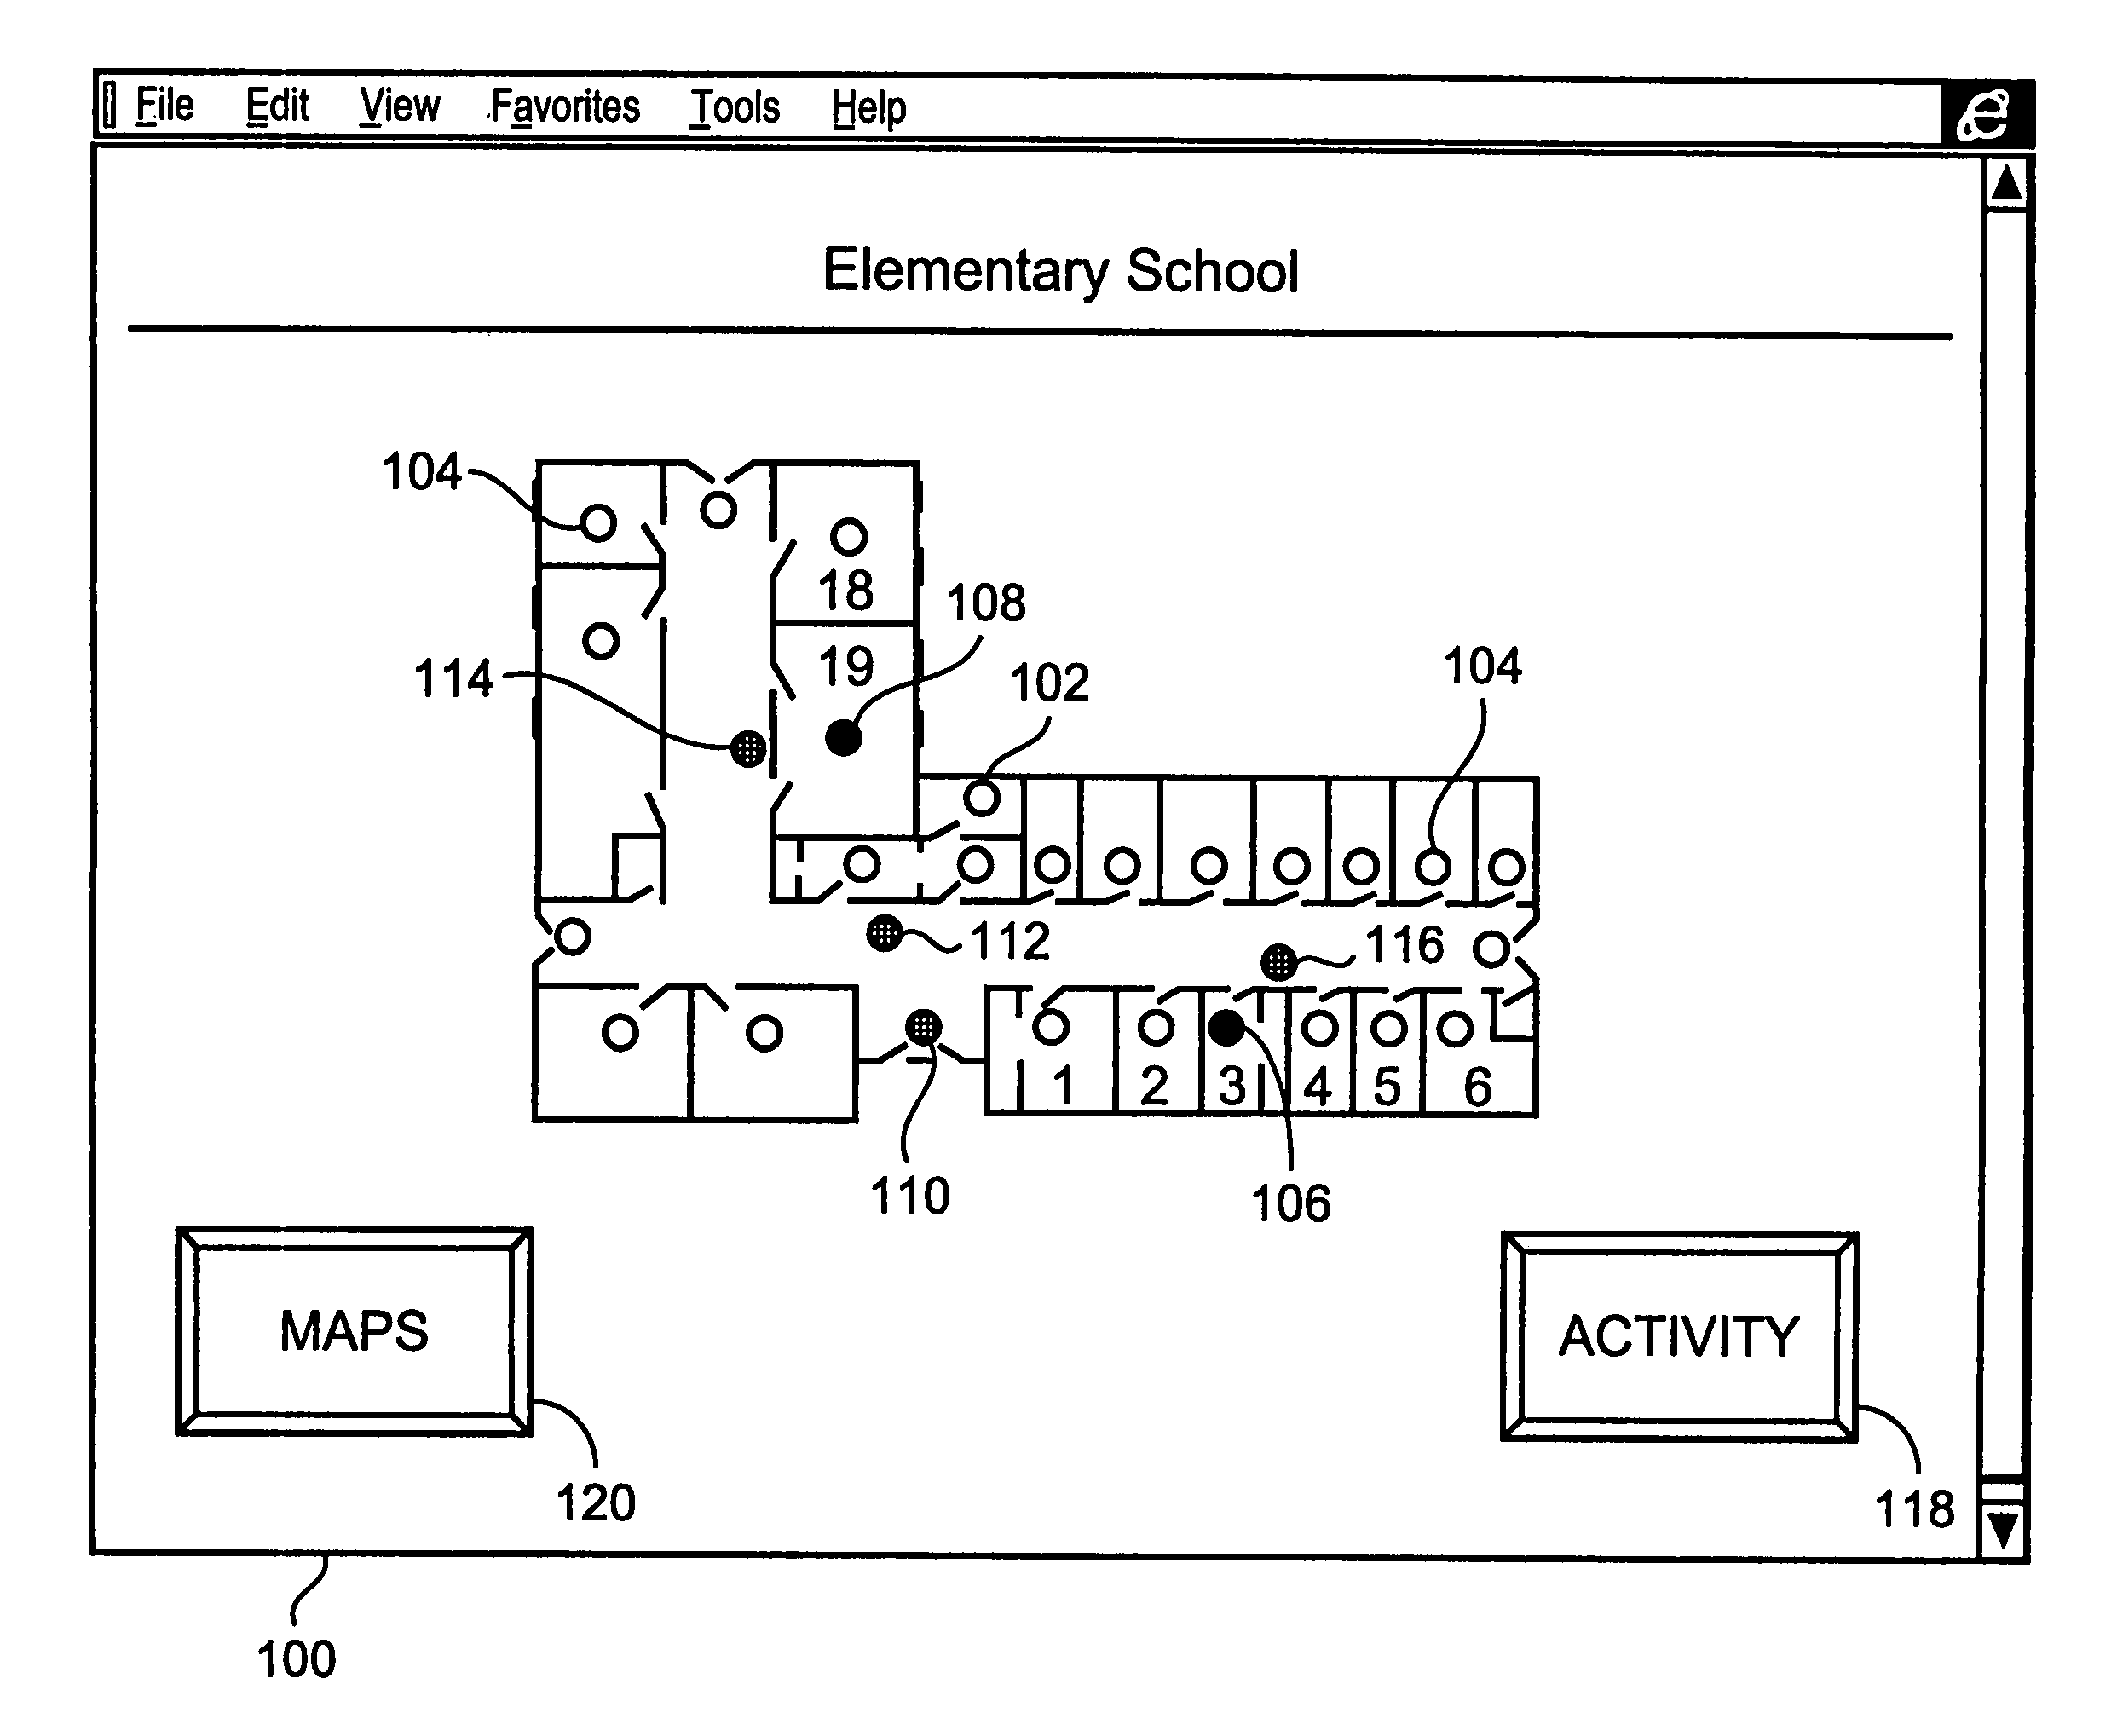 Method and apparatus for remotely monitoring a site